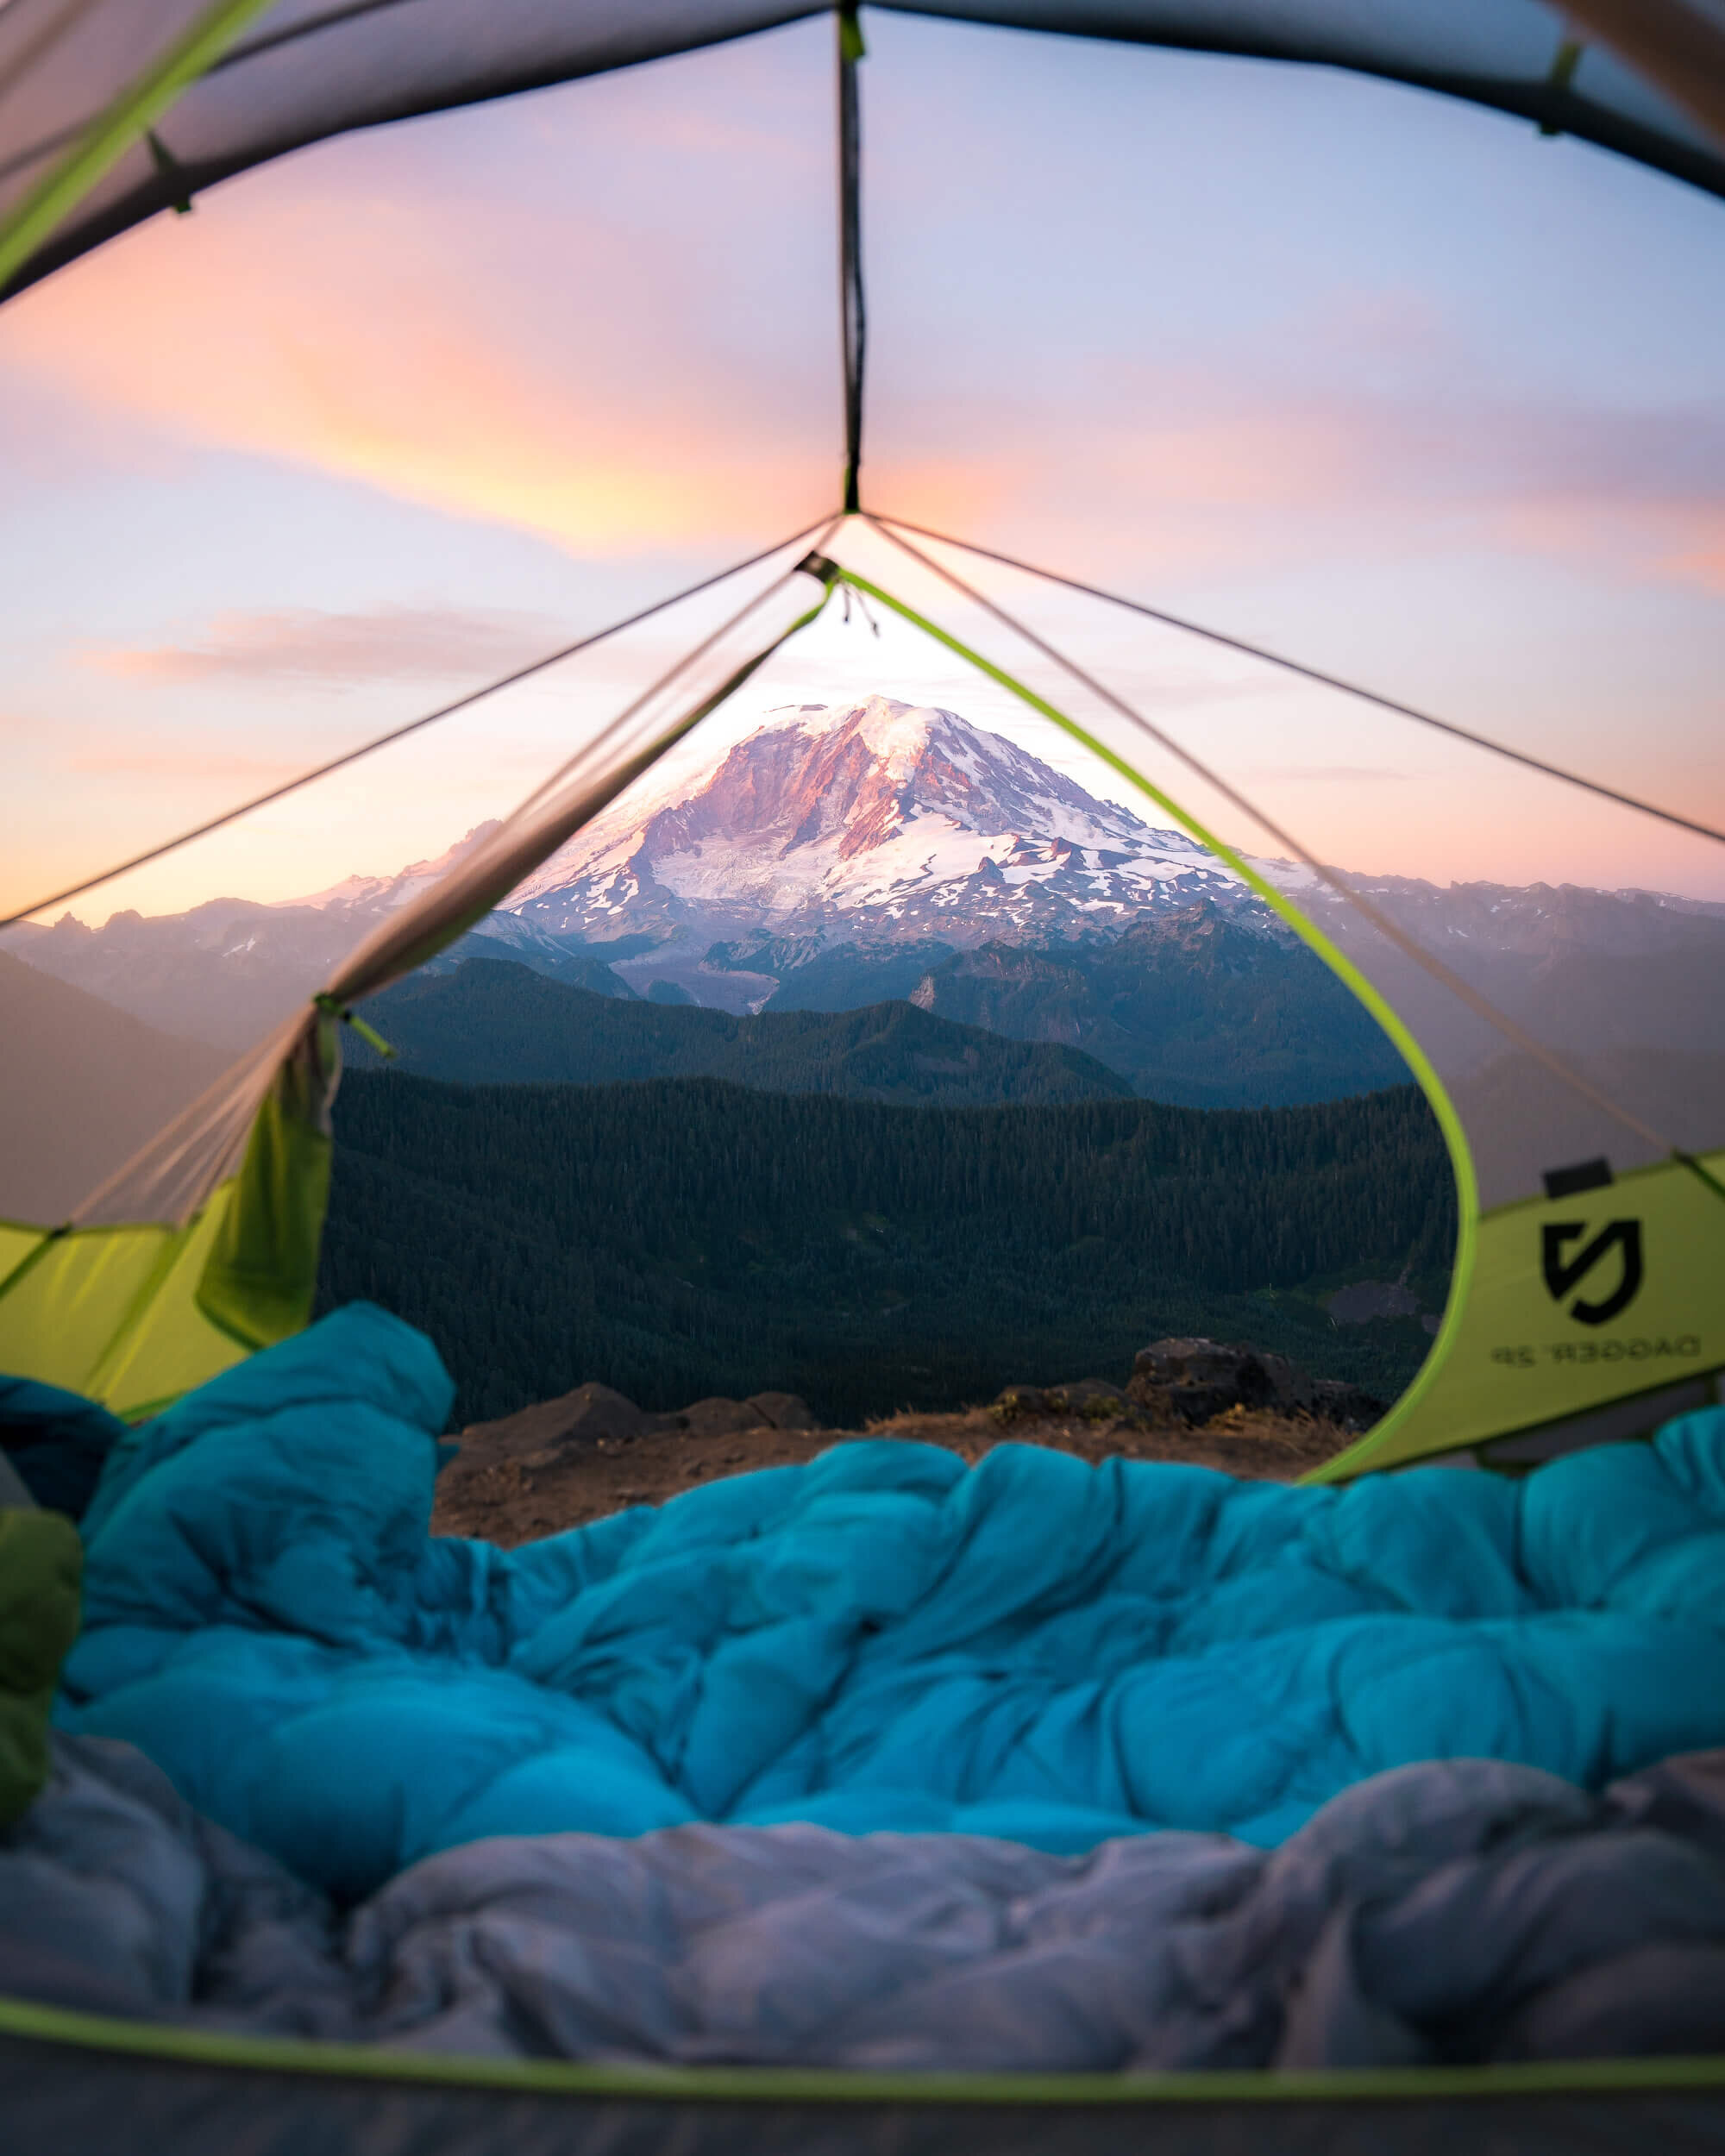 Camp spot at with a view of Mount Rainier in the distance. Shown in photo:  NEMO Equipment Tent , Marmot 15 Degree  Sleeping Bag .